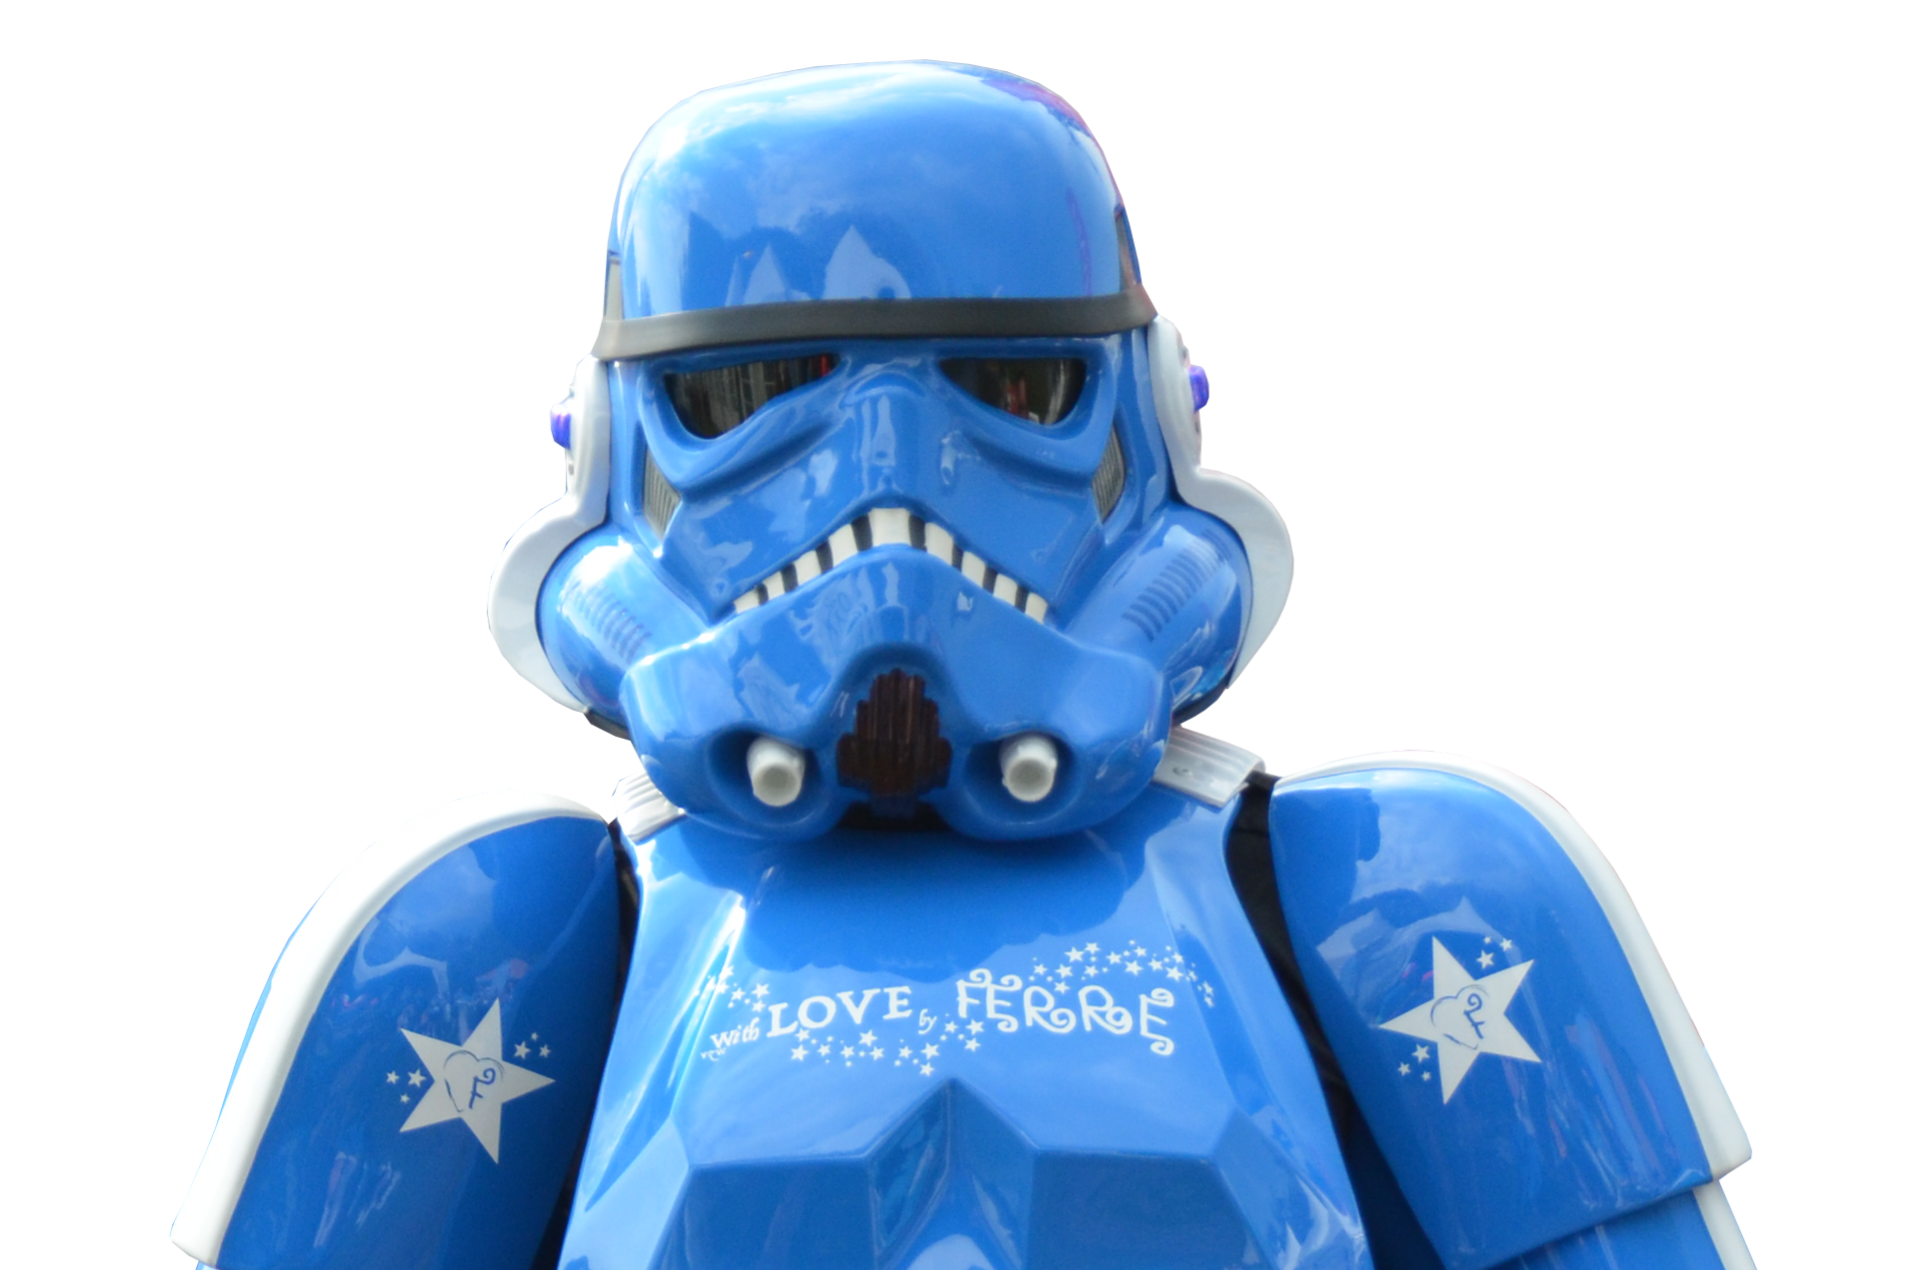 The Blue Trooper